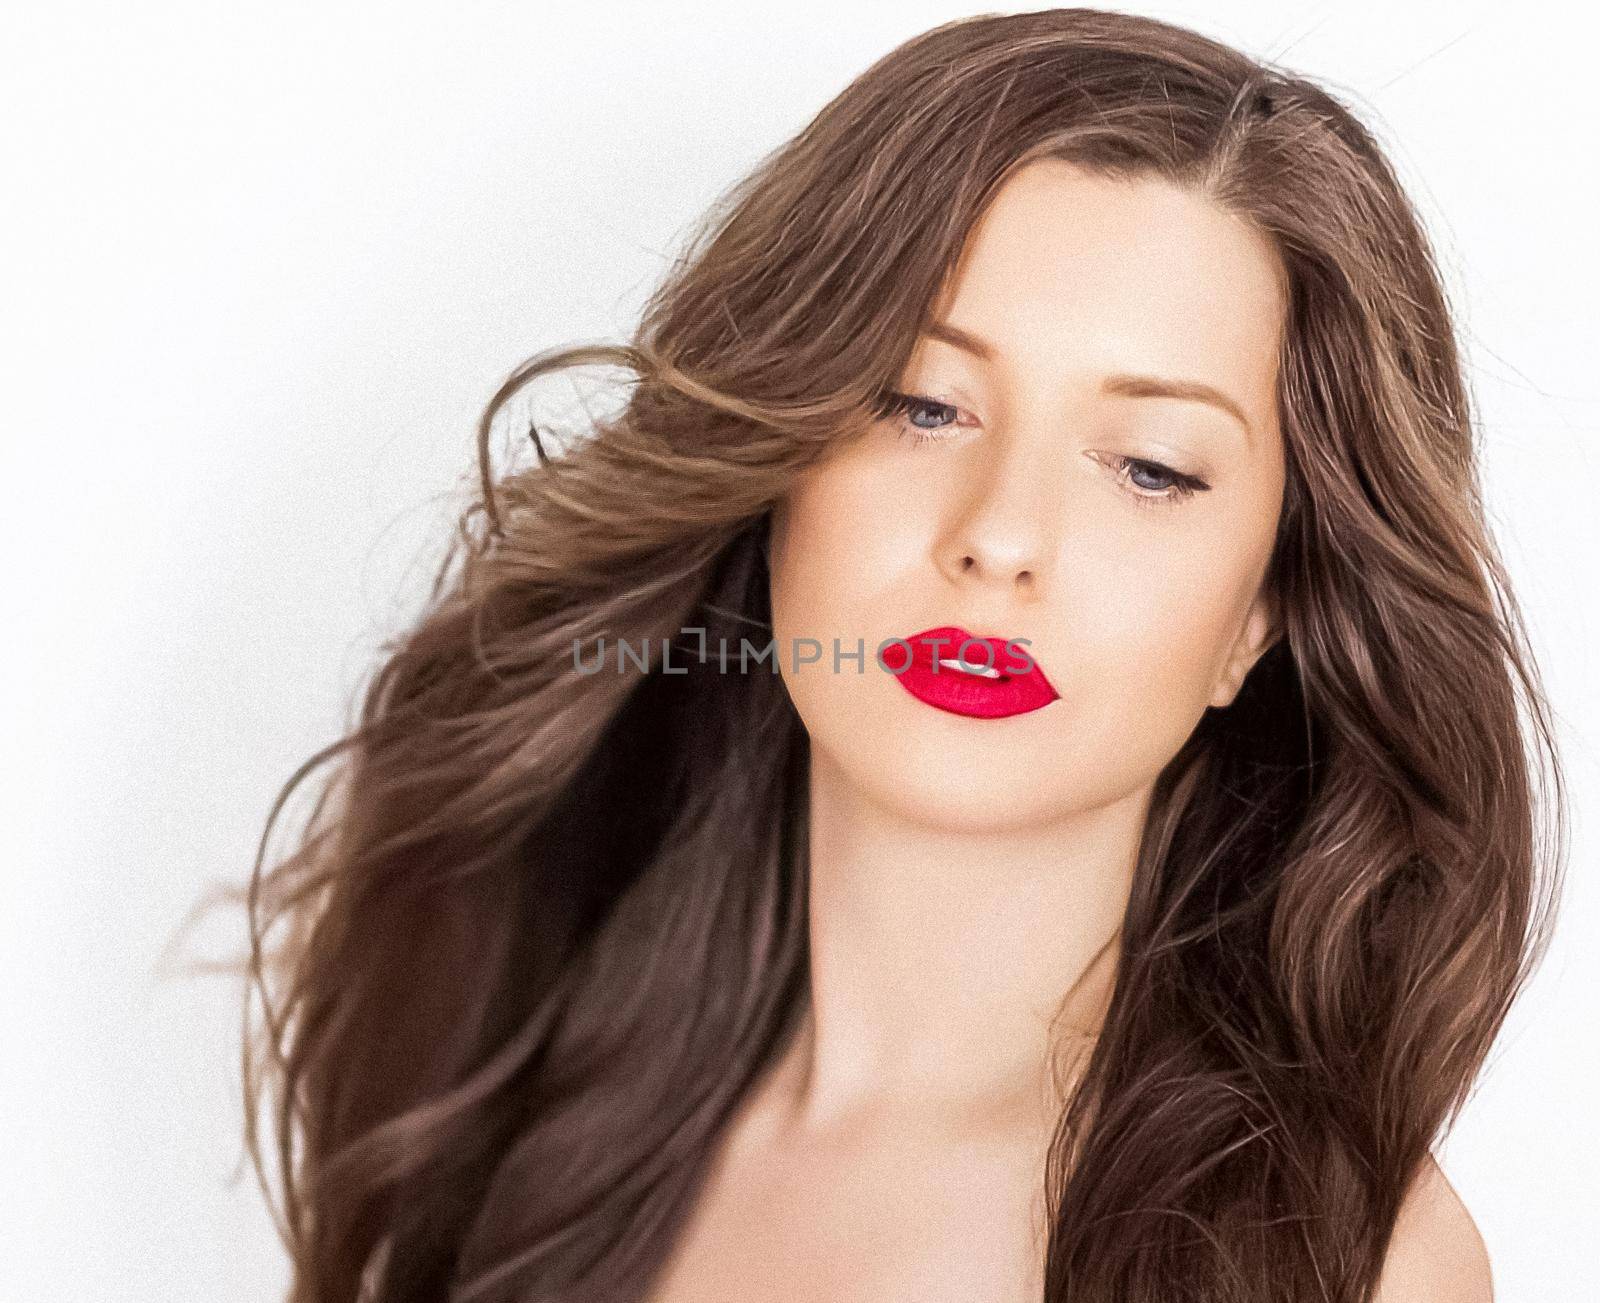 Hairstyle model and beauty face closeup. Beautiful woman with long straight brown hair styled in curly waves, classic glamour style and luxury fashion portrait.